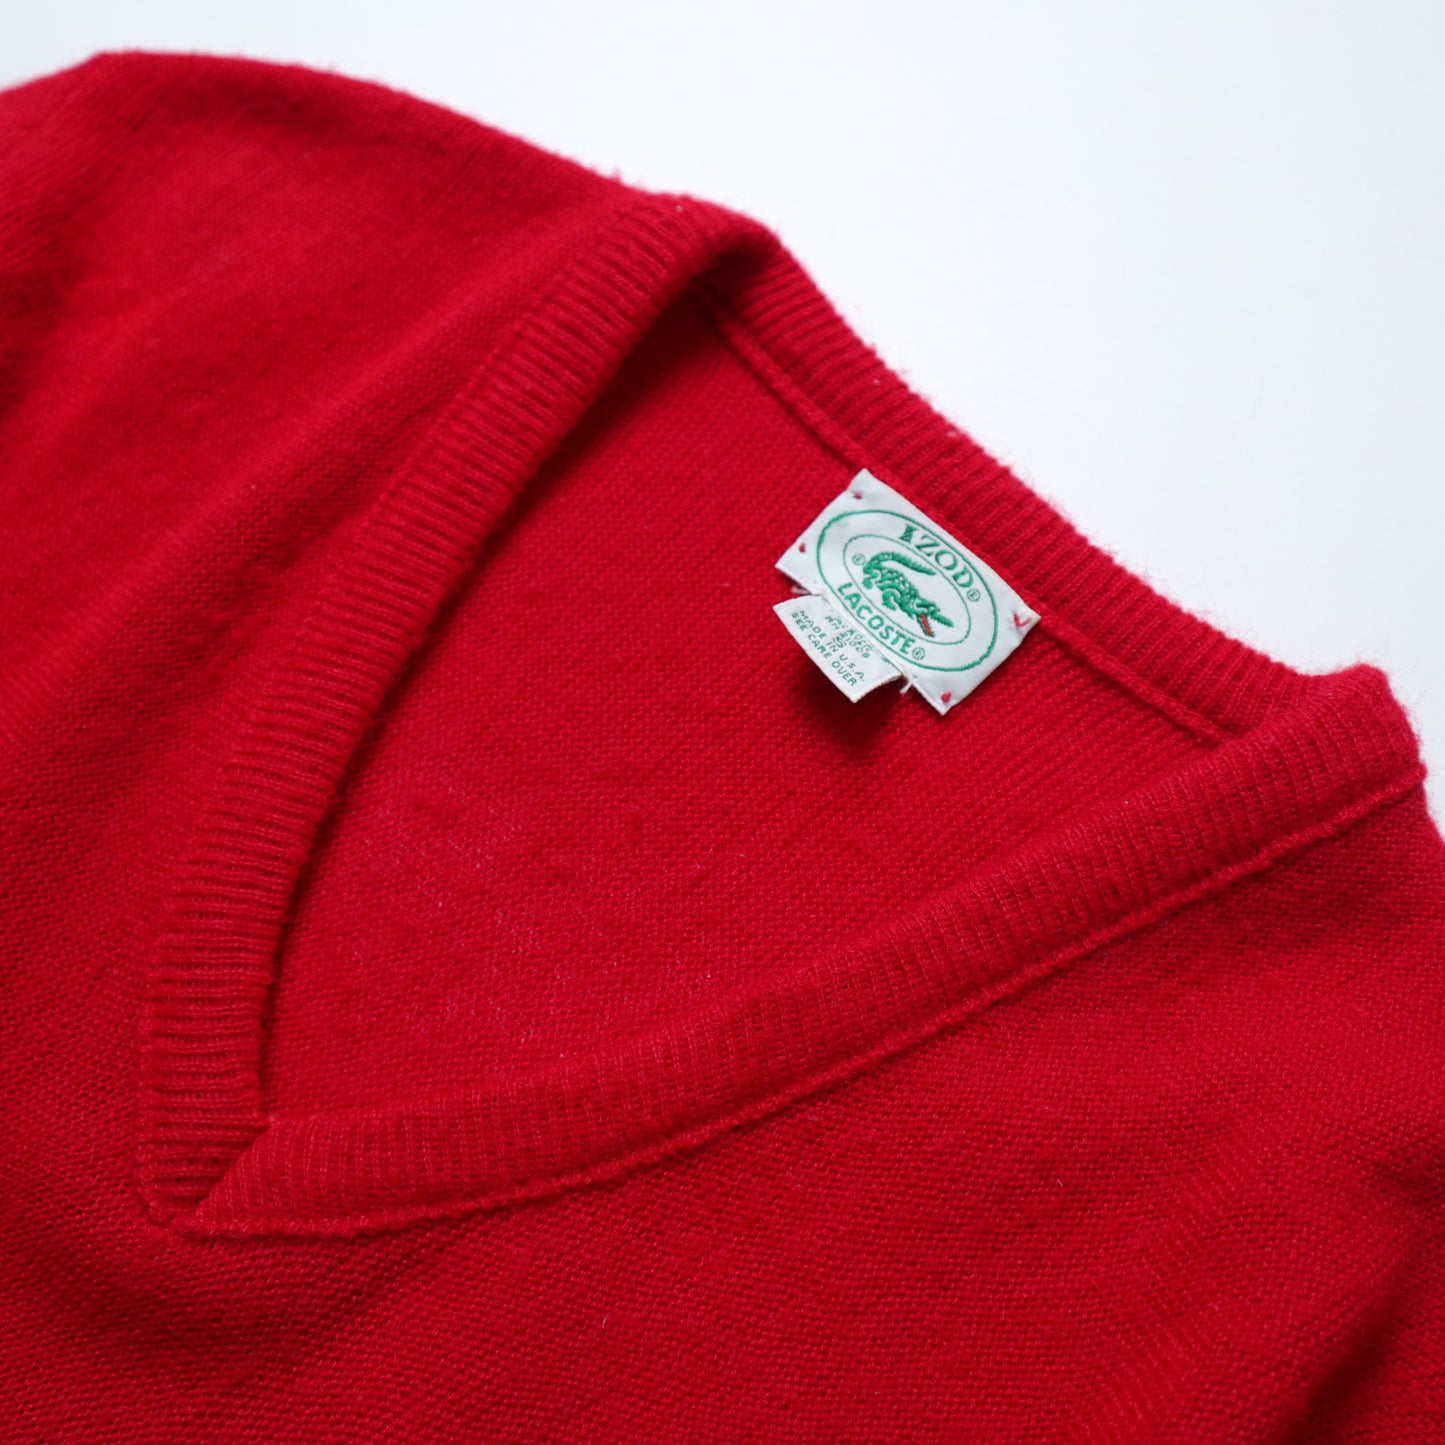 1980s Lacoste IZOD American-made red V-neck sweater